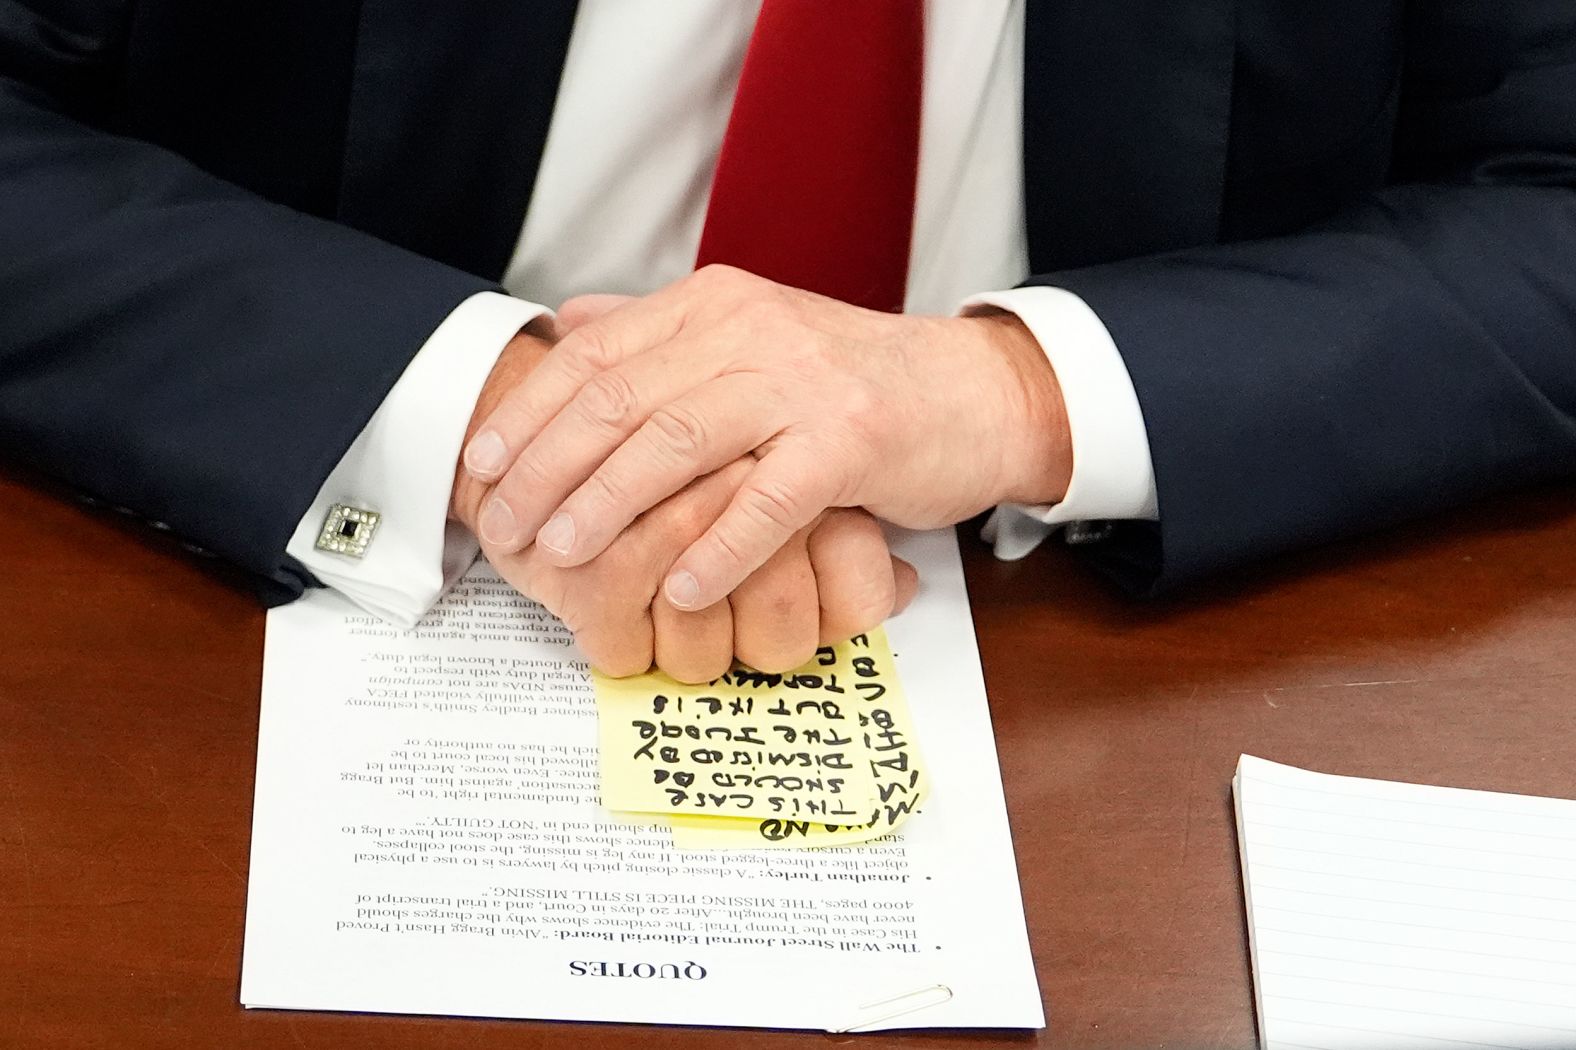 Notes are seen under Trump's hands as he awaits court proceedings on Tuesday, May 28.